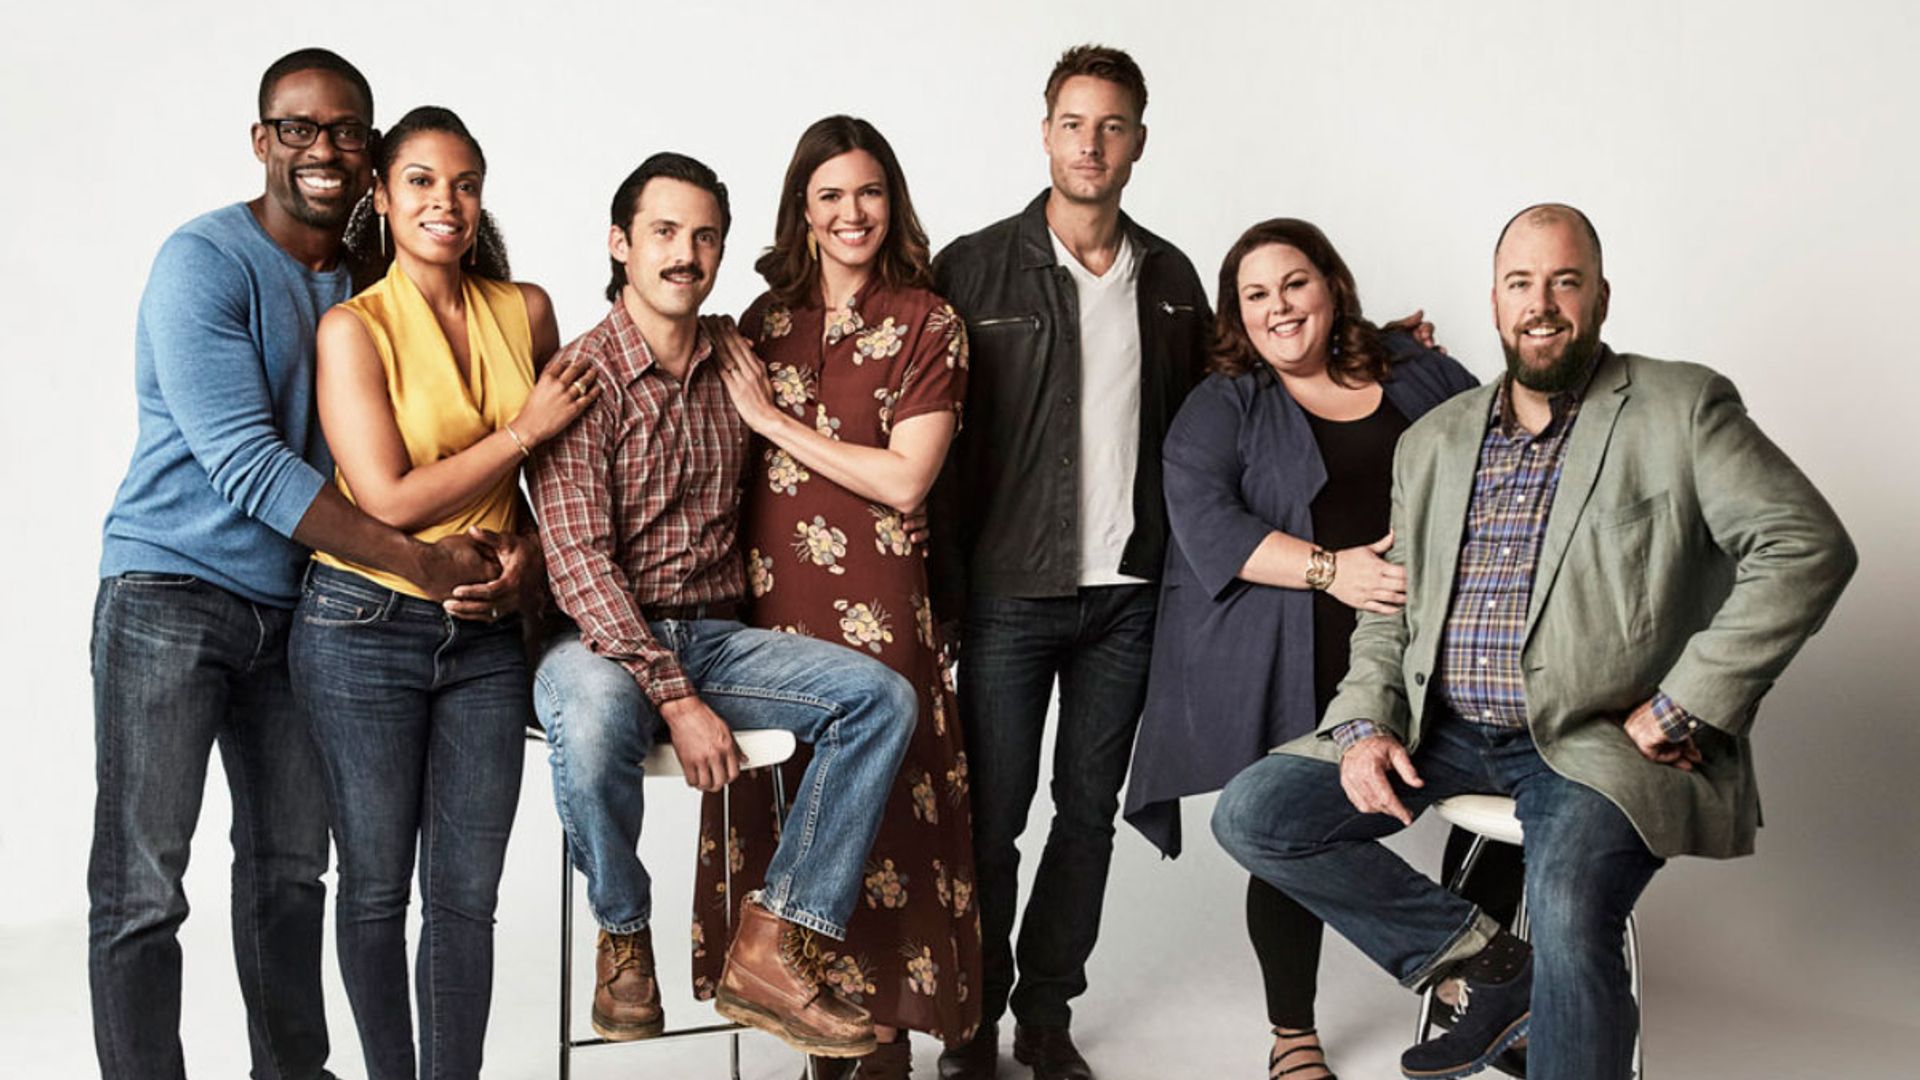 What the 'This Is Us' Cast Look Like In Real Life - This Is Us Cast Photos  of Mandy Moore, Milo Ventimiglia